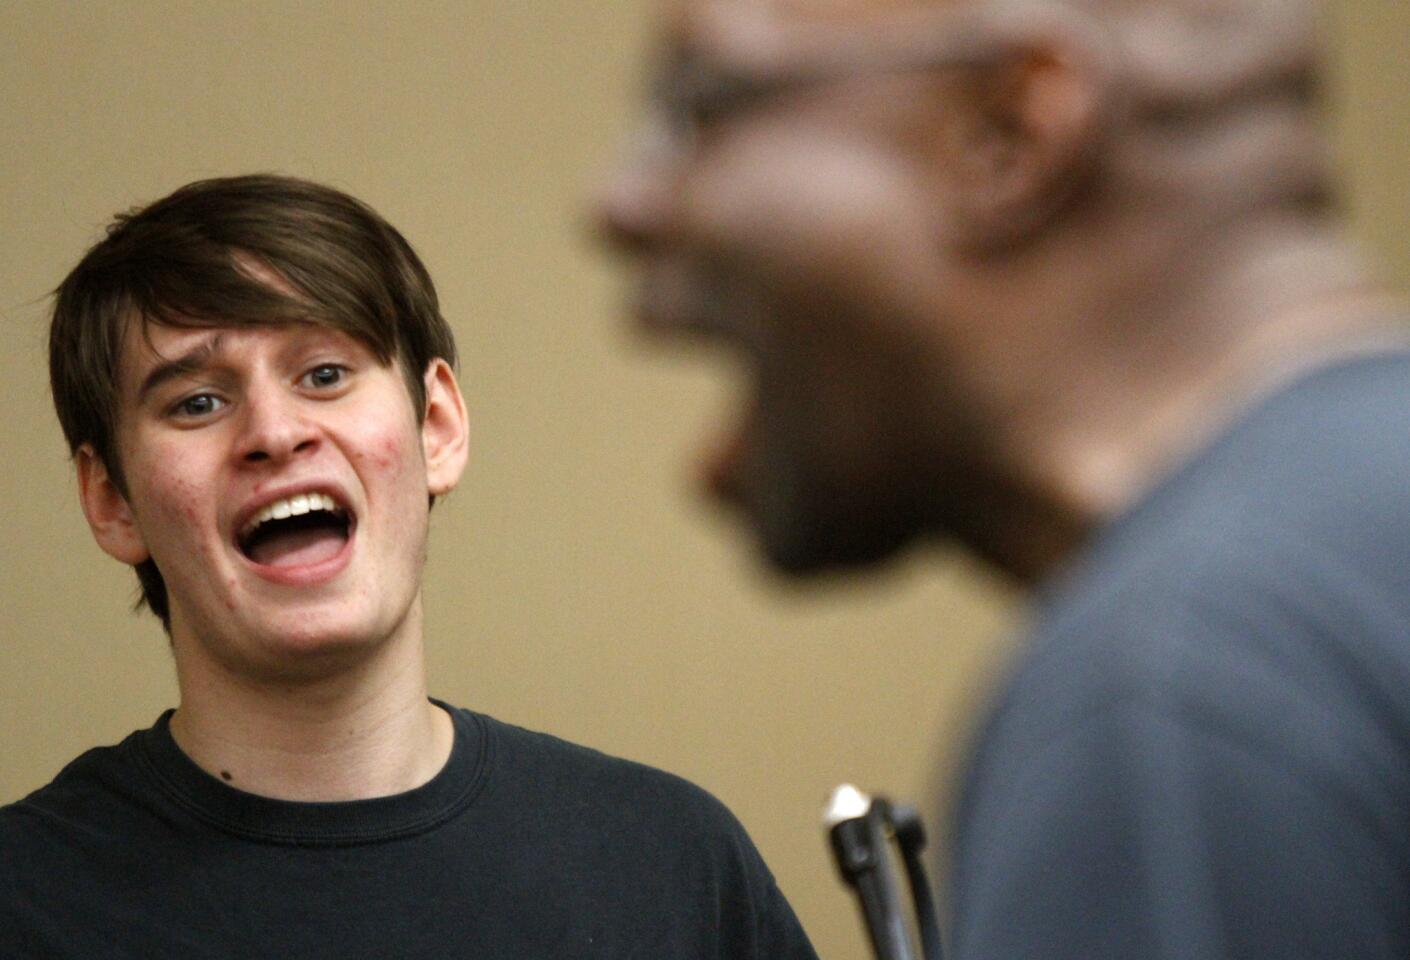 Nathan Heldman, a tenor from Los Angeles, trains for the choir under the guidance of Ronald McCurdy, foreground, at Grammy Camp -- Jazz Session.